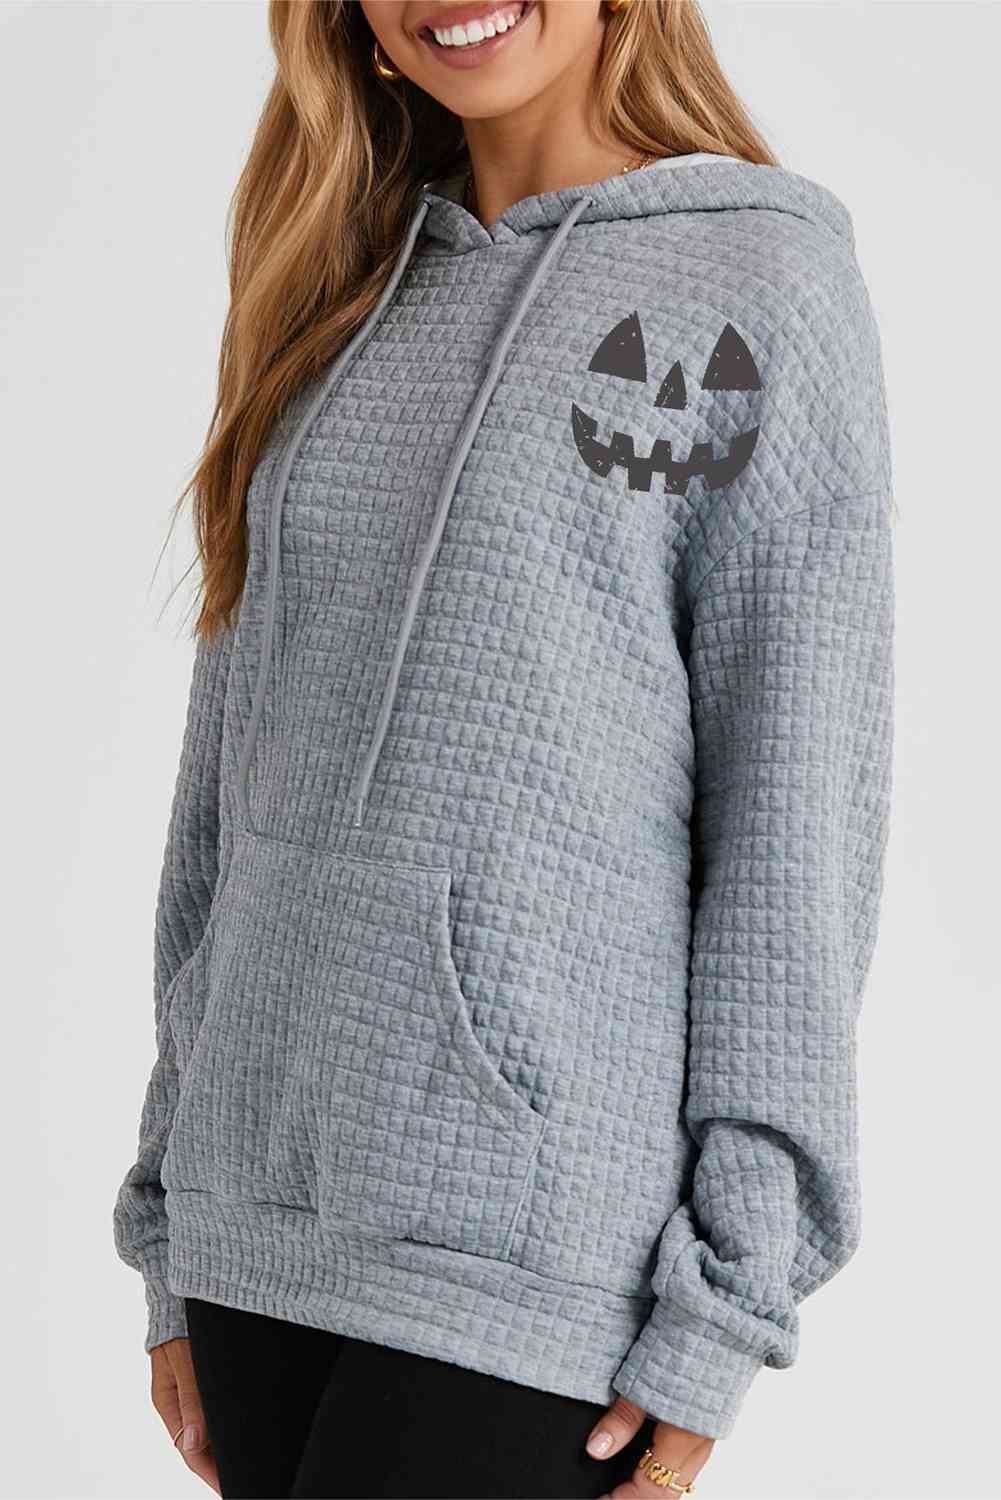 Women's Pumpkin Face Graphic Drawstring Hoodie with Pocket